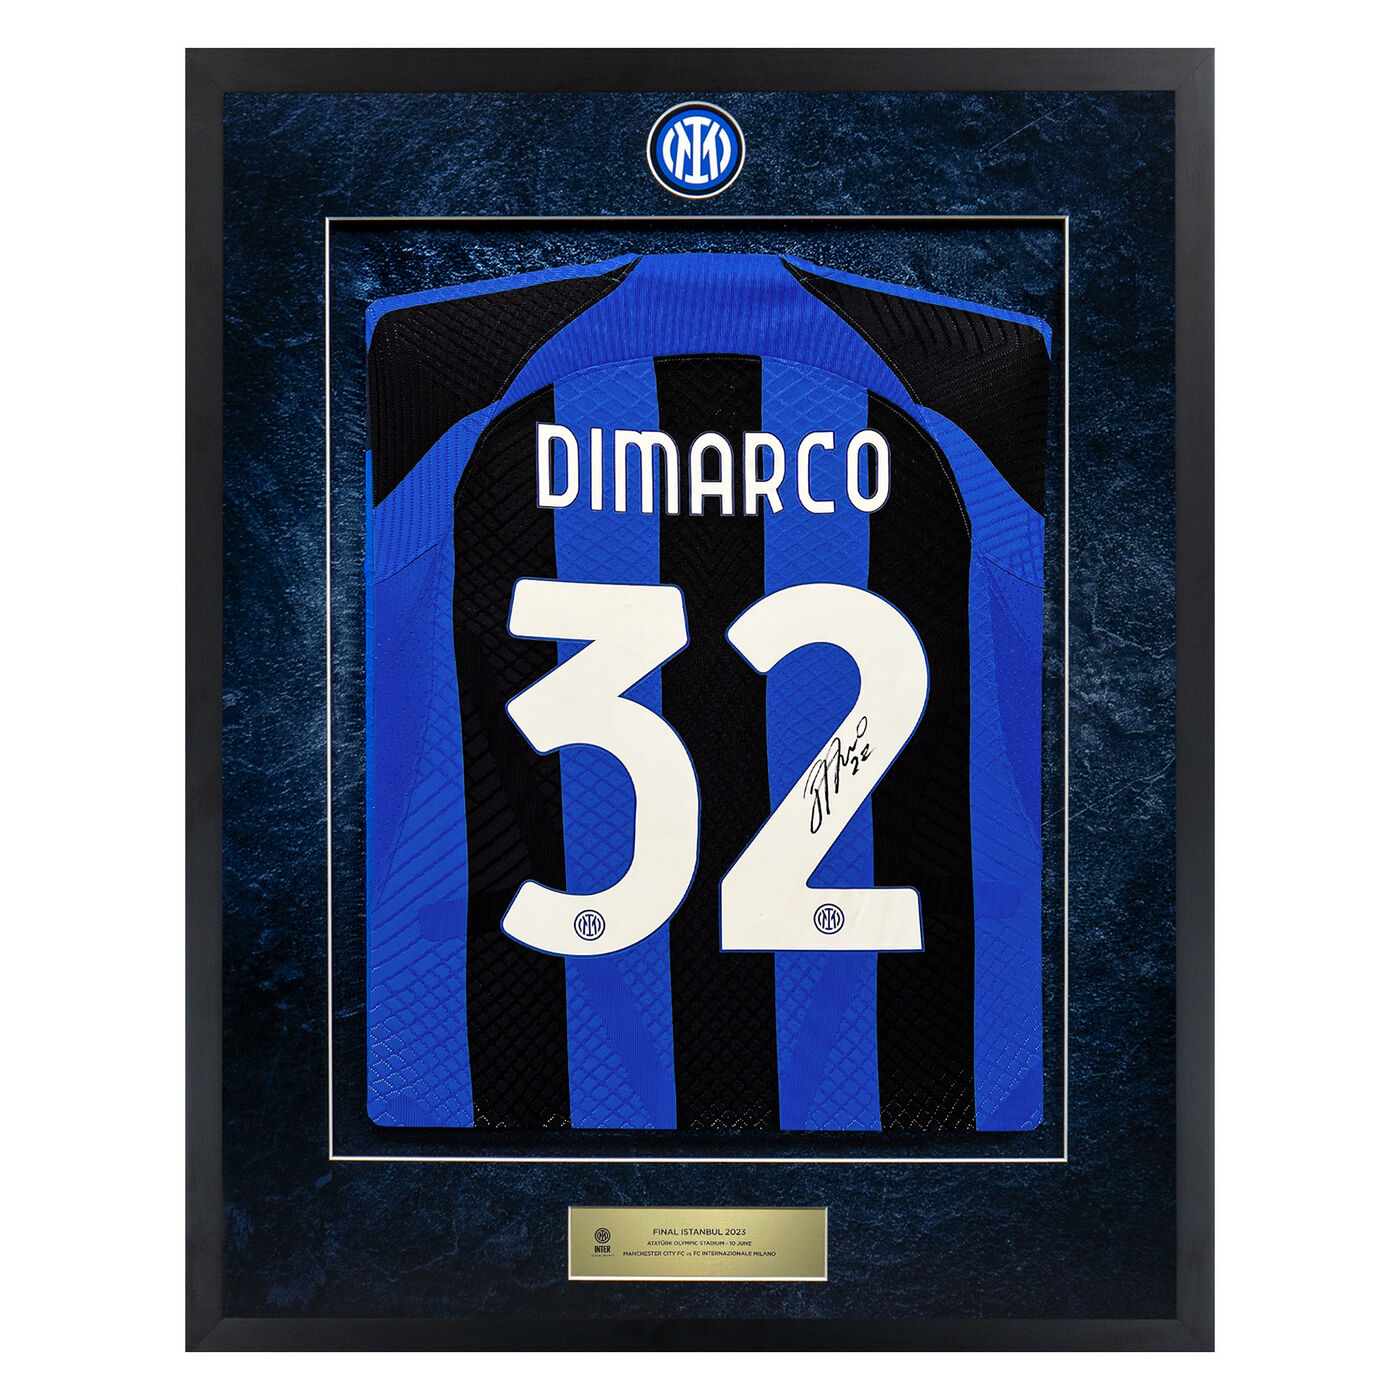 Image IM HOME MATCH JERSEY FINAL ISTANBUL 2023 SIGNED DIMARCO